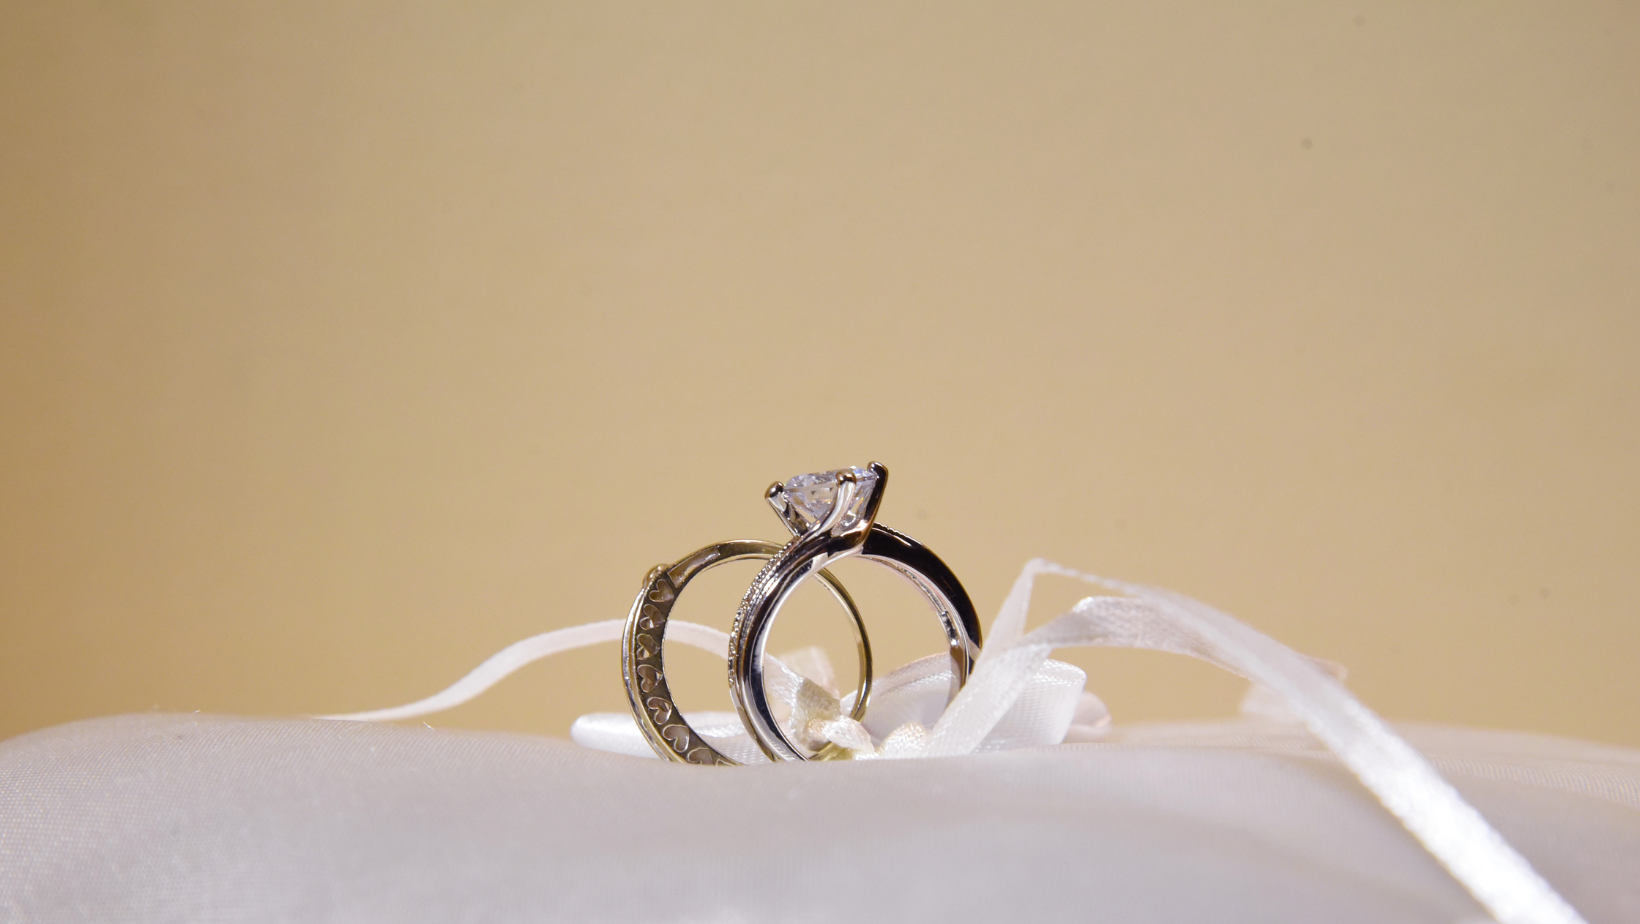 Lost Engagement Ring: How To Find Them Fast